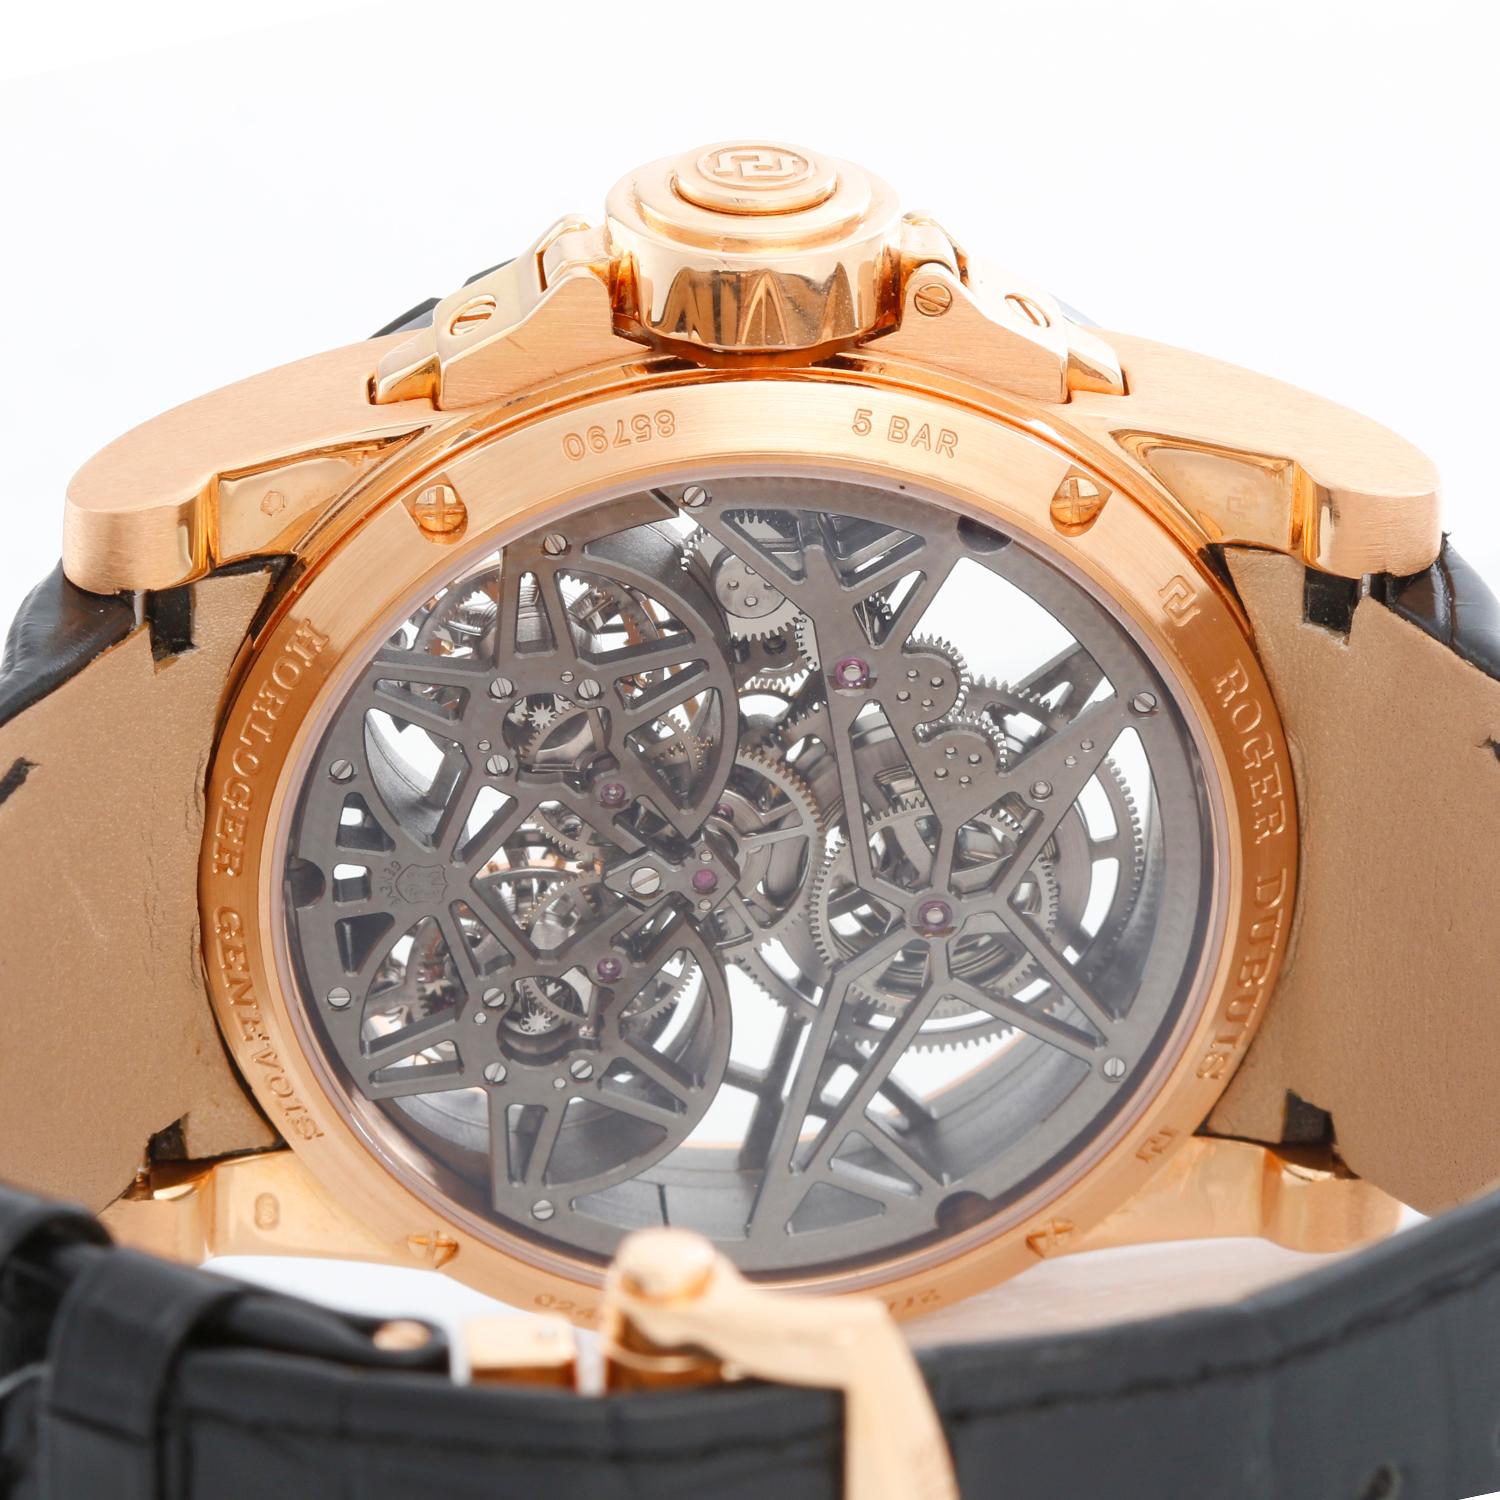 aaa roger dubuis watches